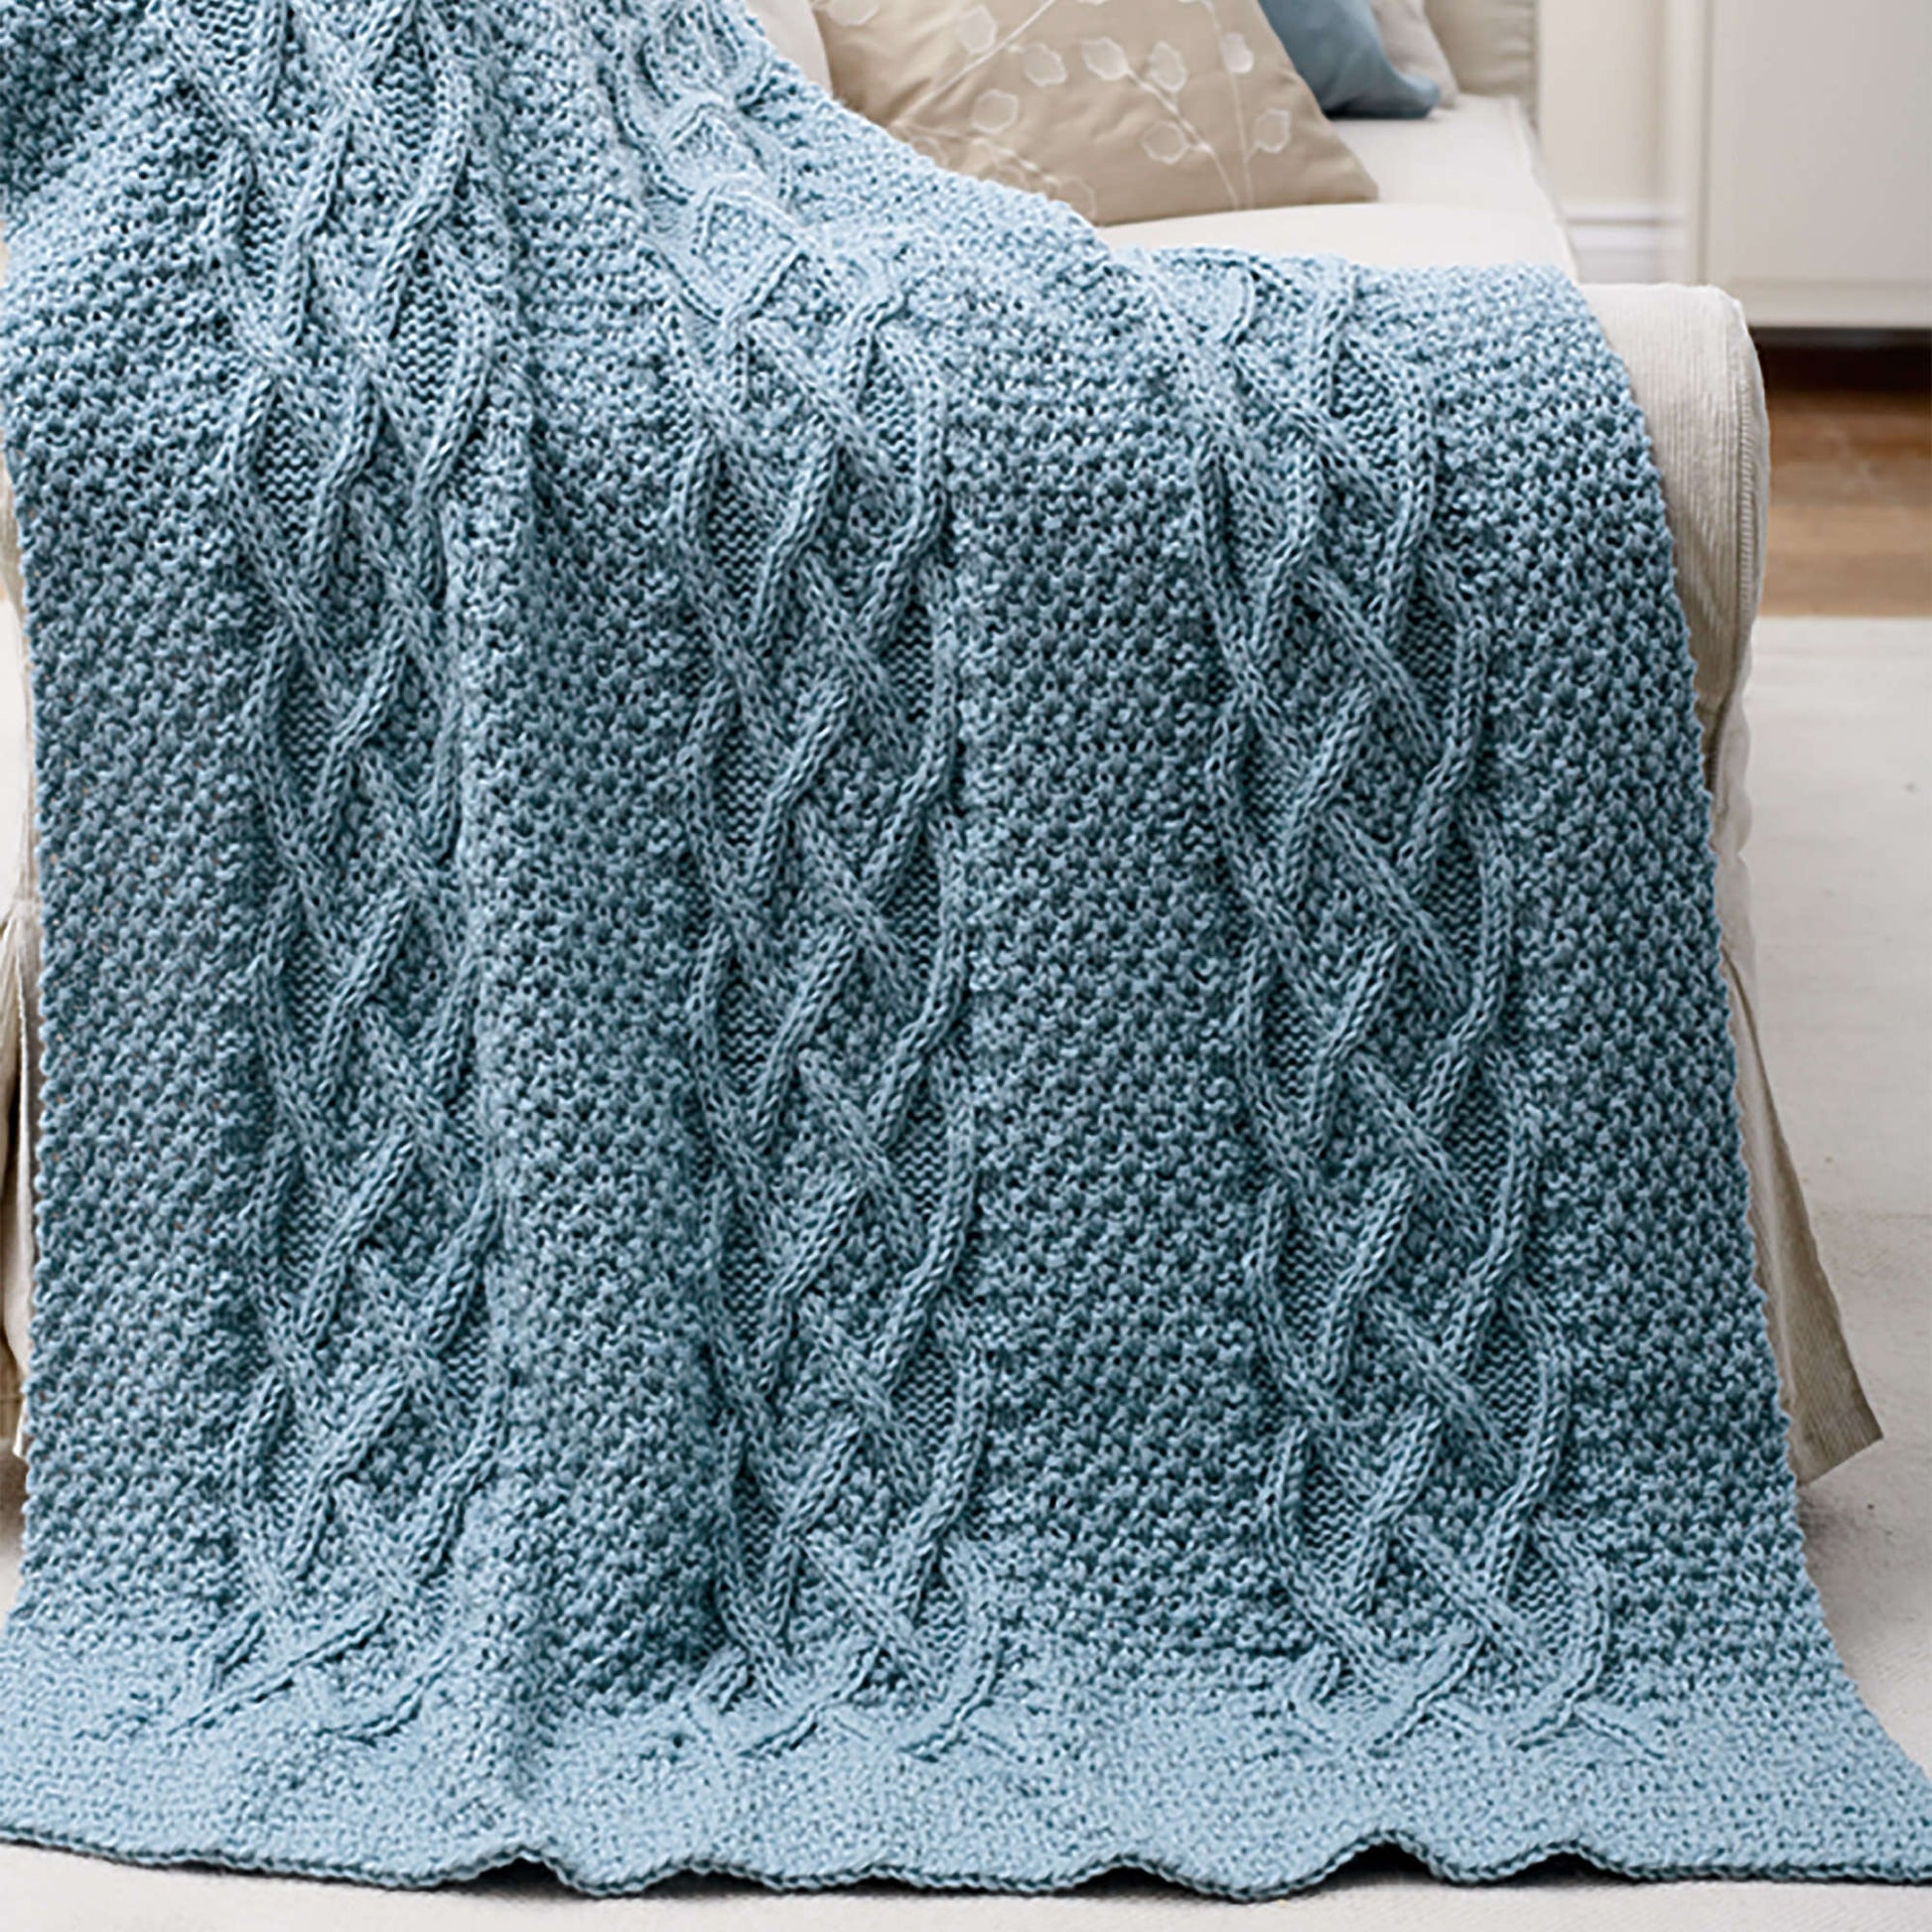 Free Patons Knit Cushy Cables Afghan Pattern